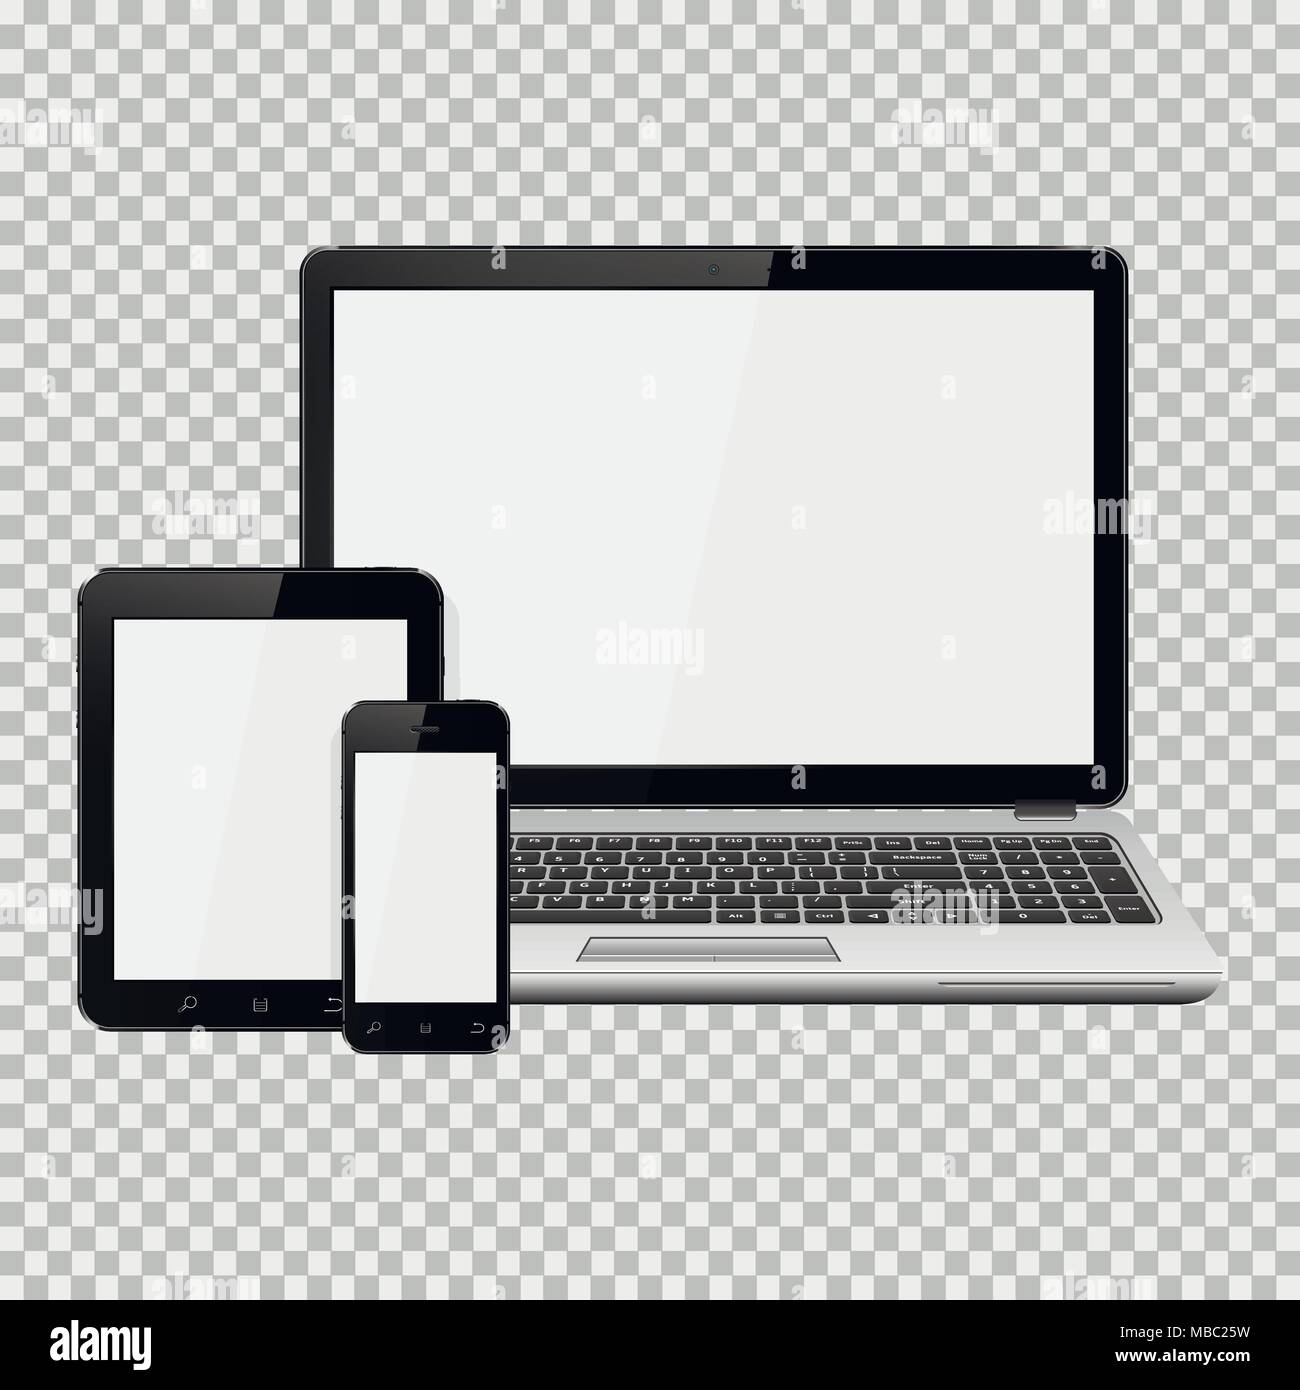 Download Laptop, smartphone and tablet mockup isolated on ...